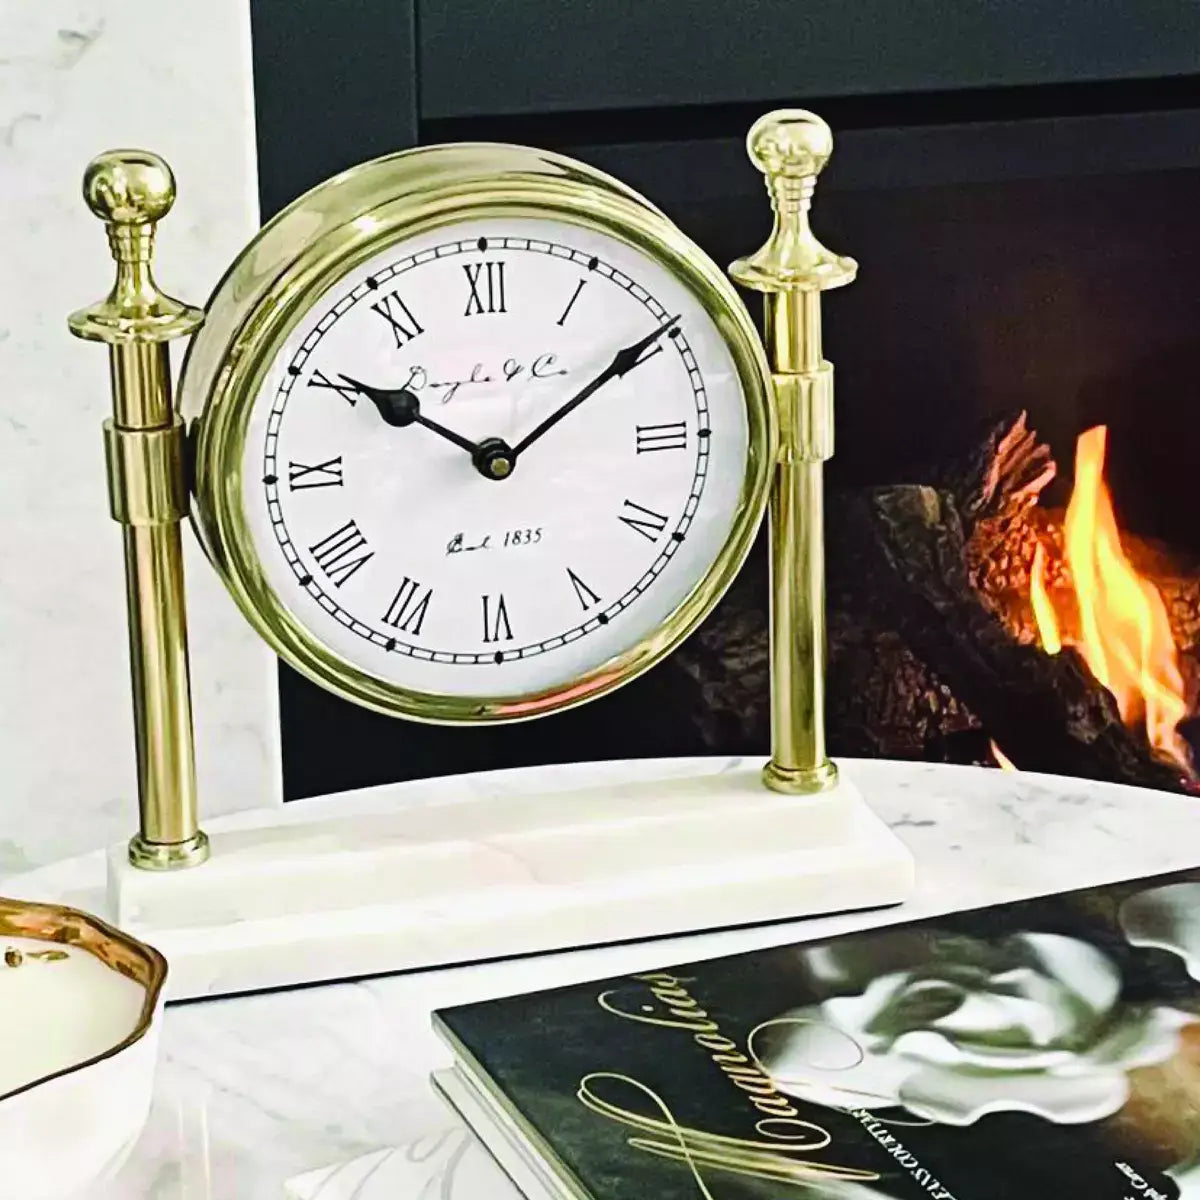 A Column Clock with White Marble Base - Gold sits on a table next to a fireplace.